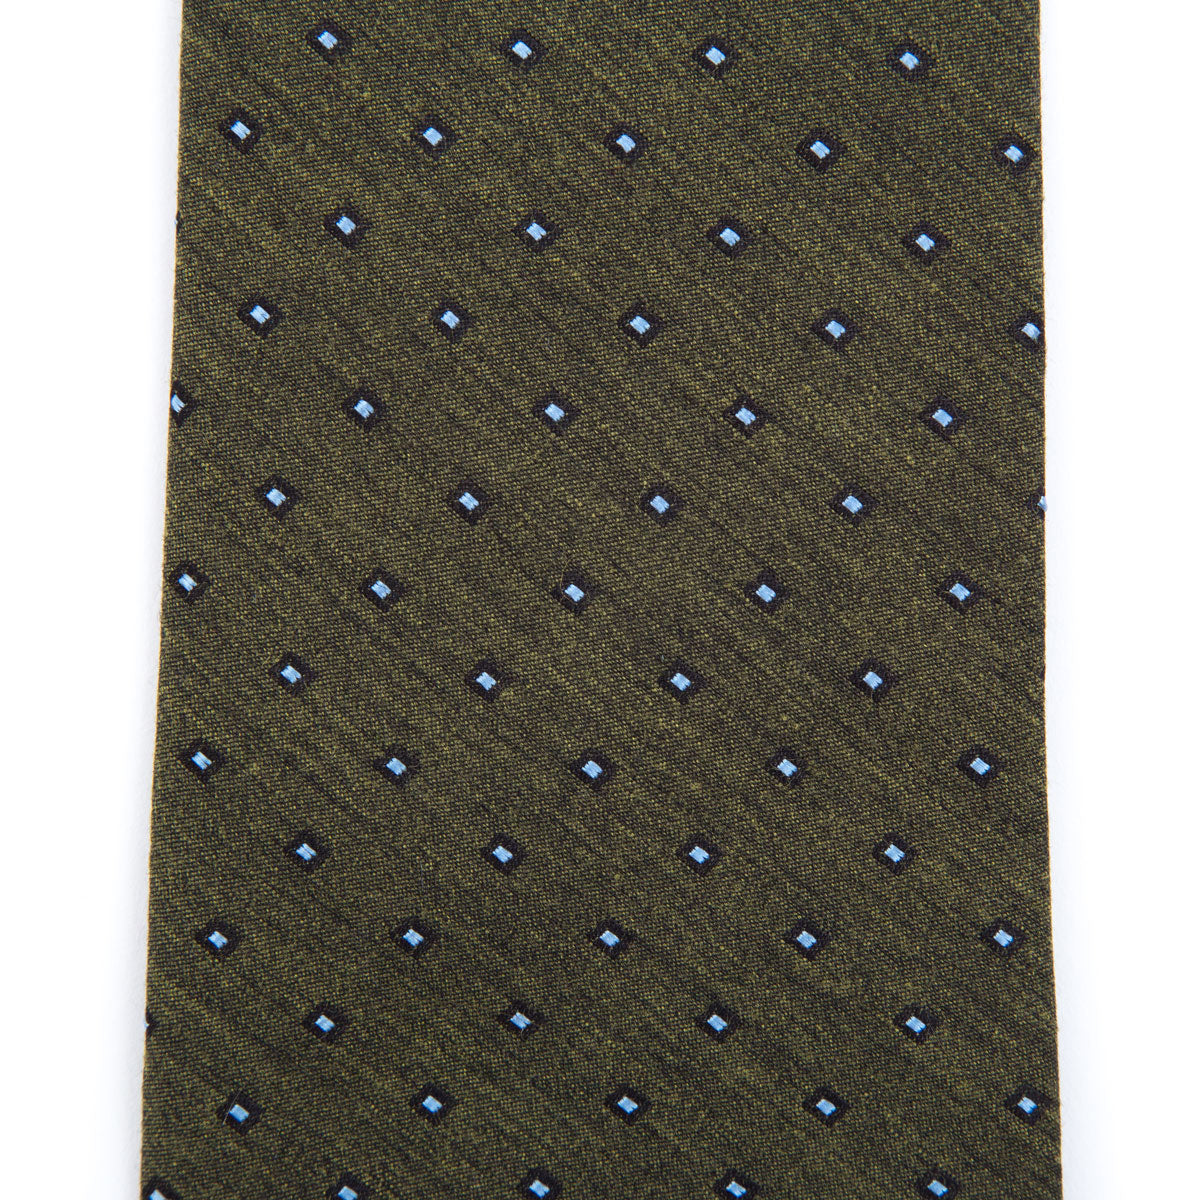 Olive green speckled tie